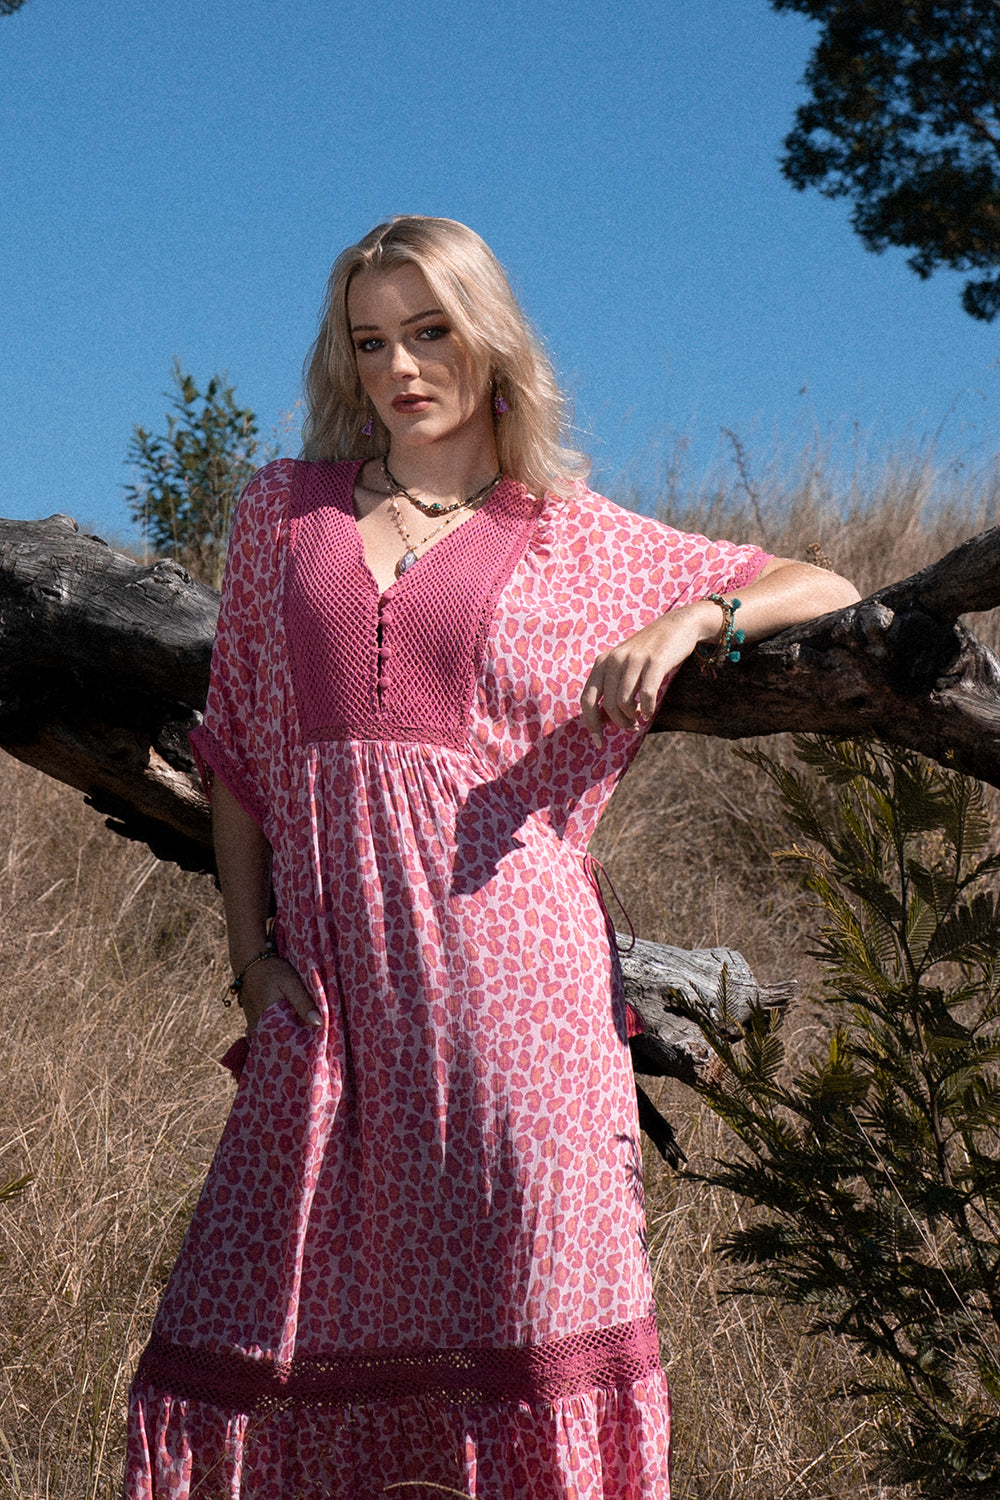 Daisy Boho Dress - Magenta - Into the Wild by Tulle and Batiste